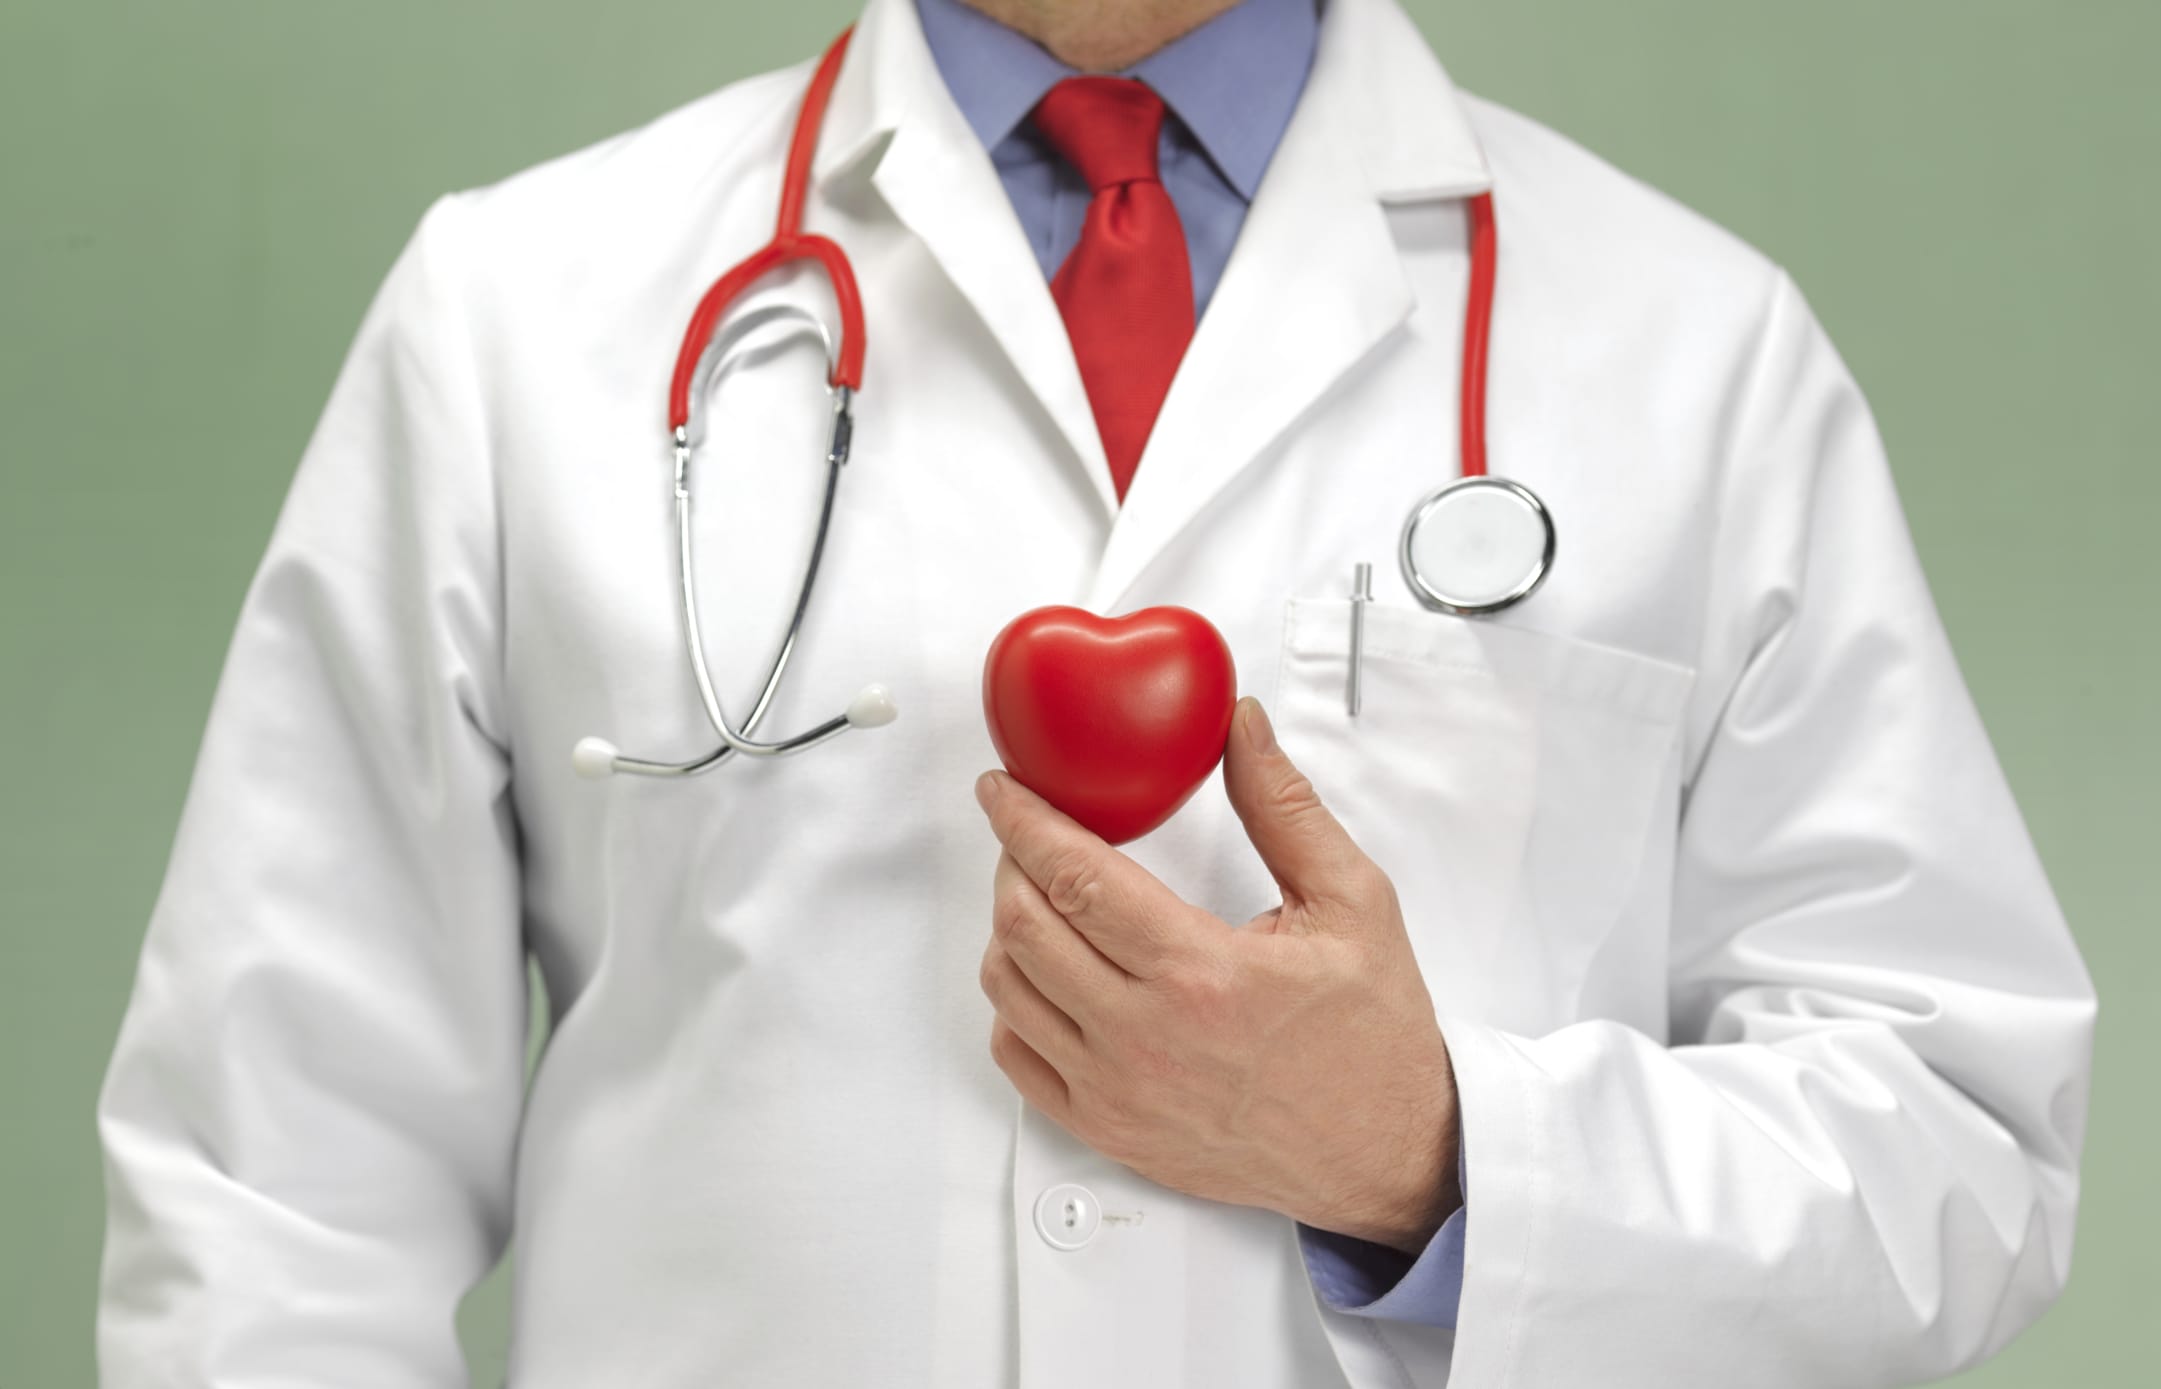 What are the Symptoms of Heart Failure and the Treatment for Heart Failure?